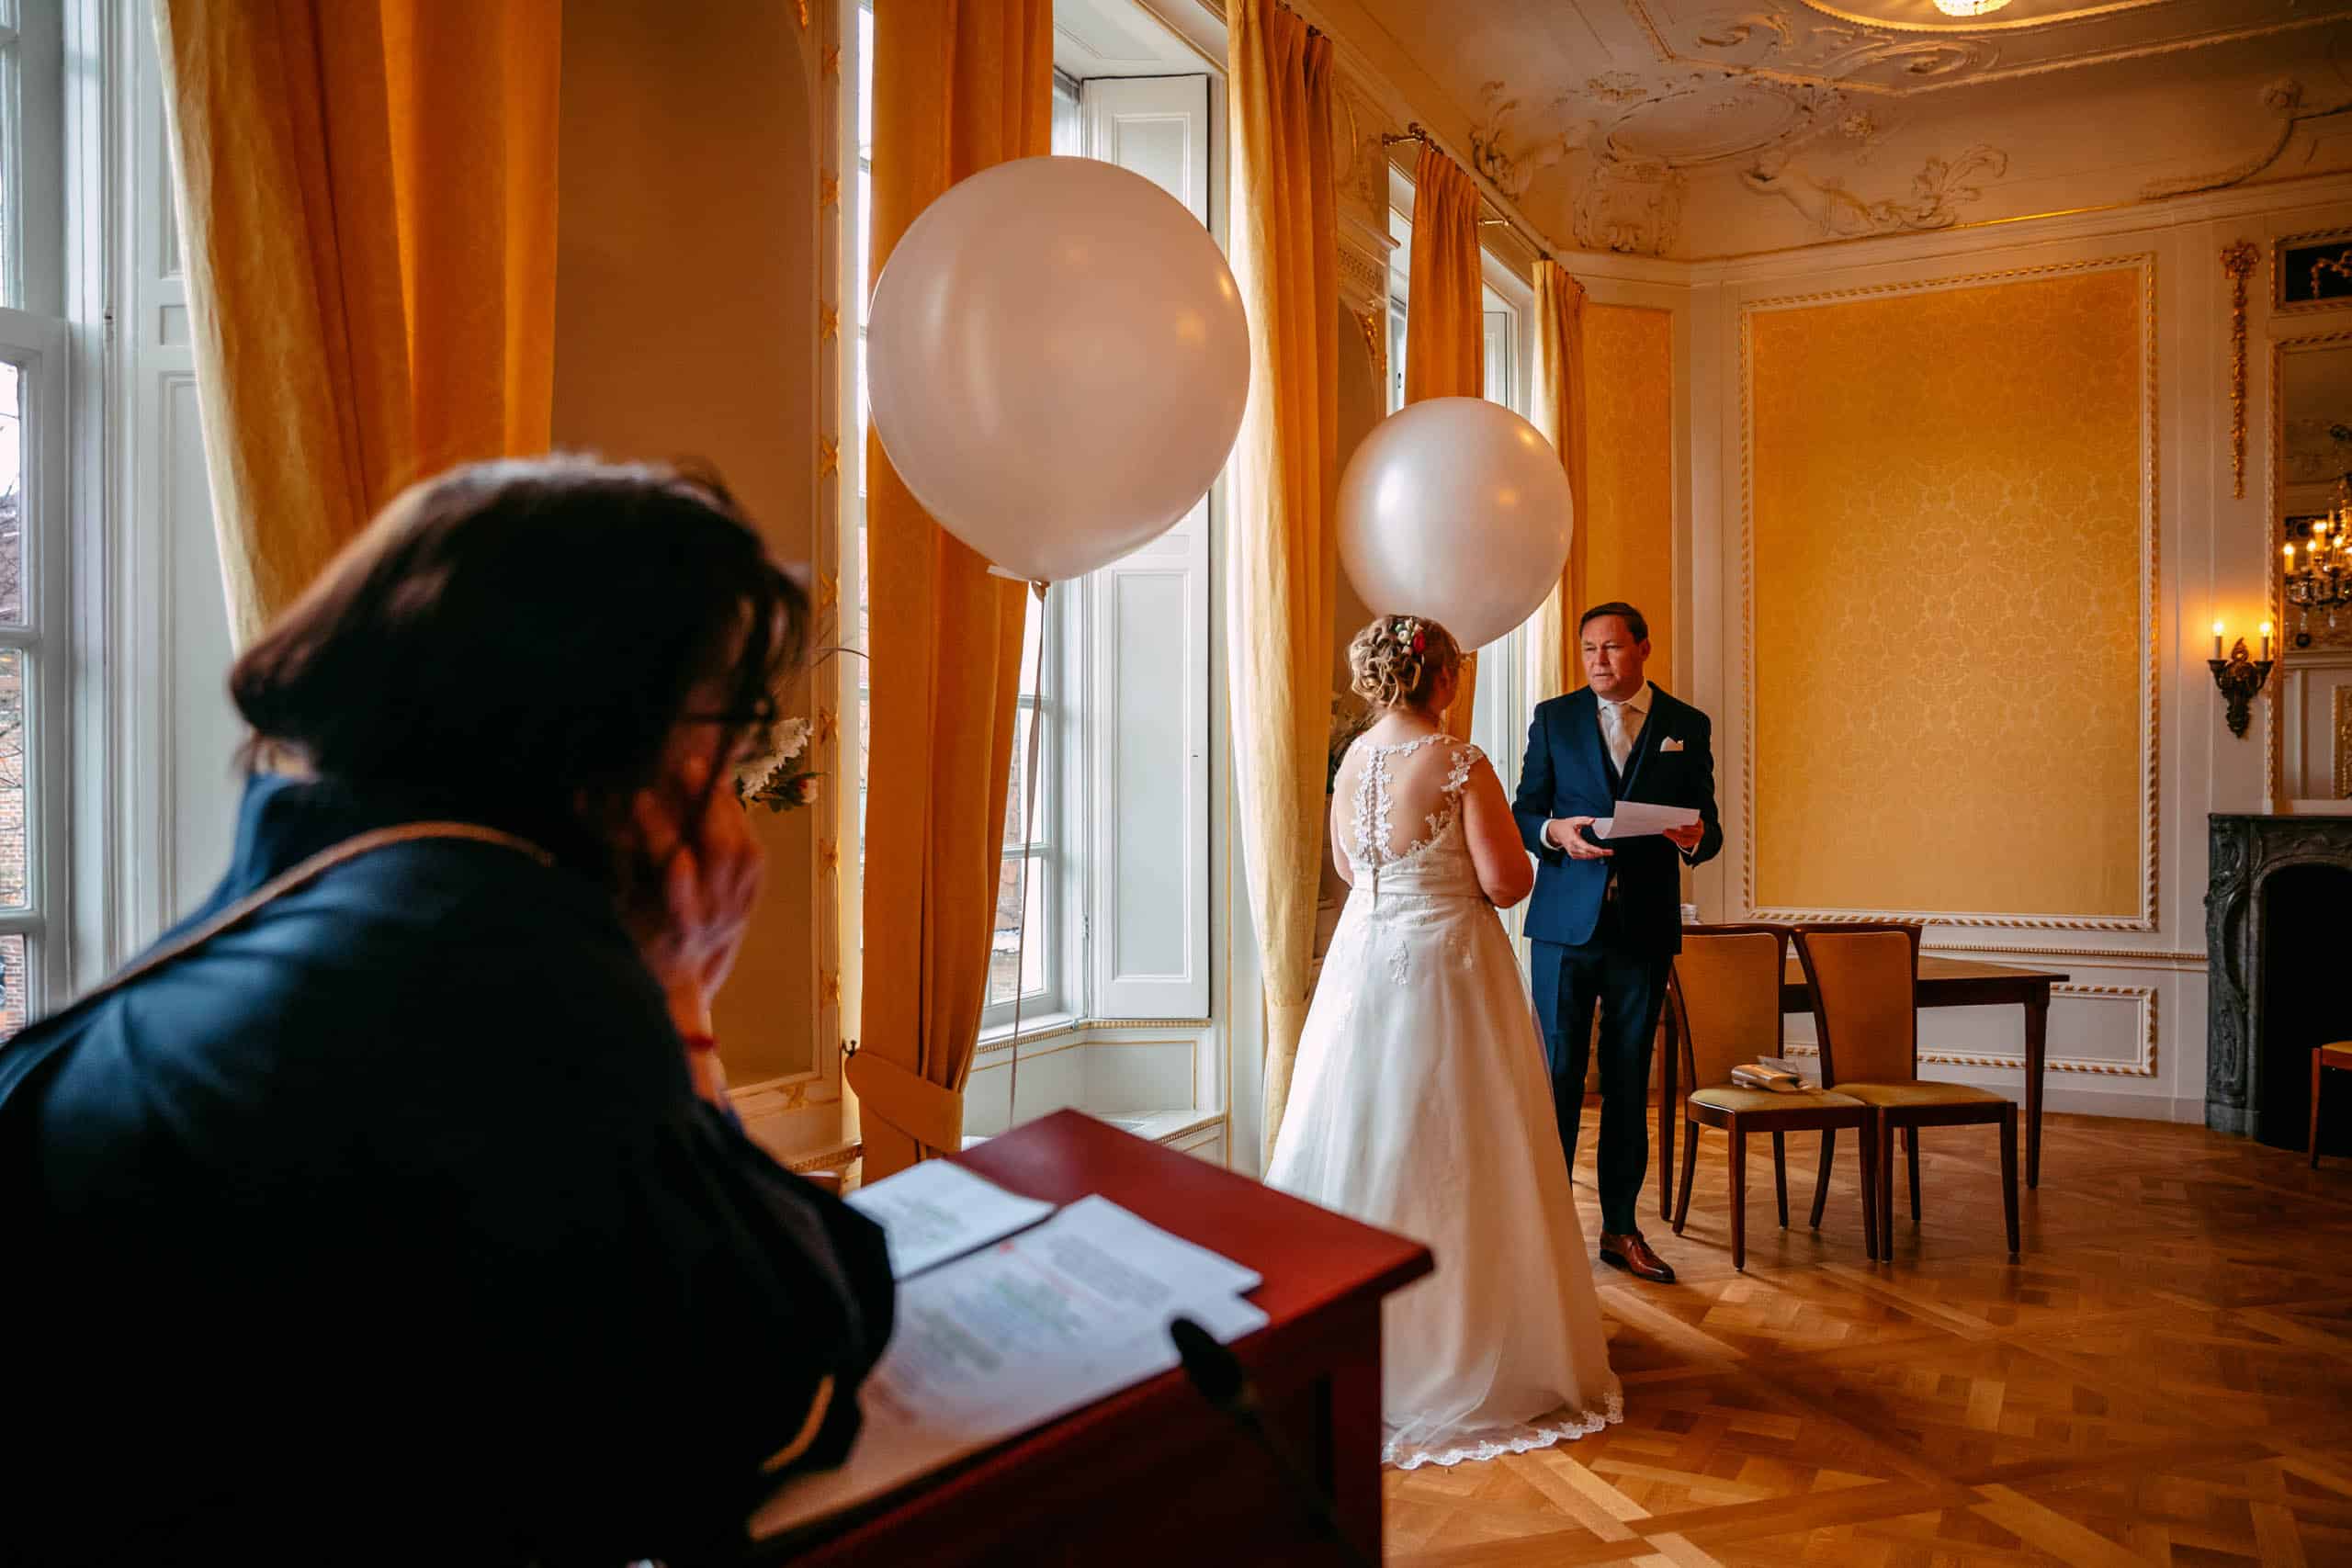 A bride and groom stand in a room decorated with balloons before their wedding.